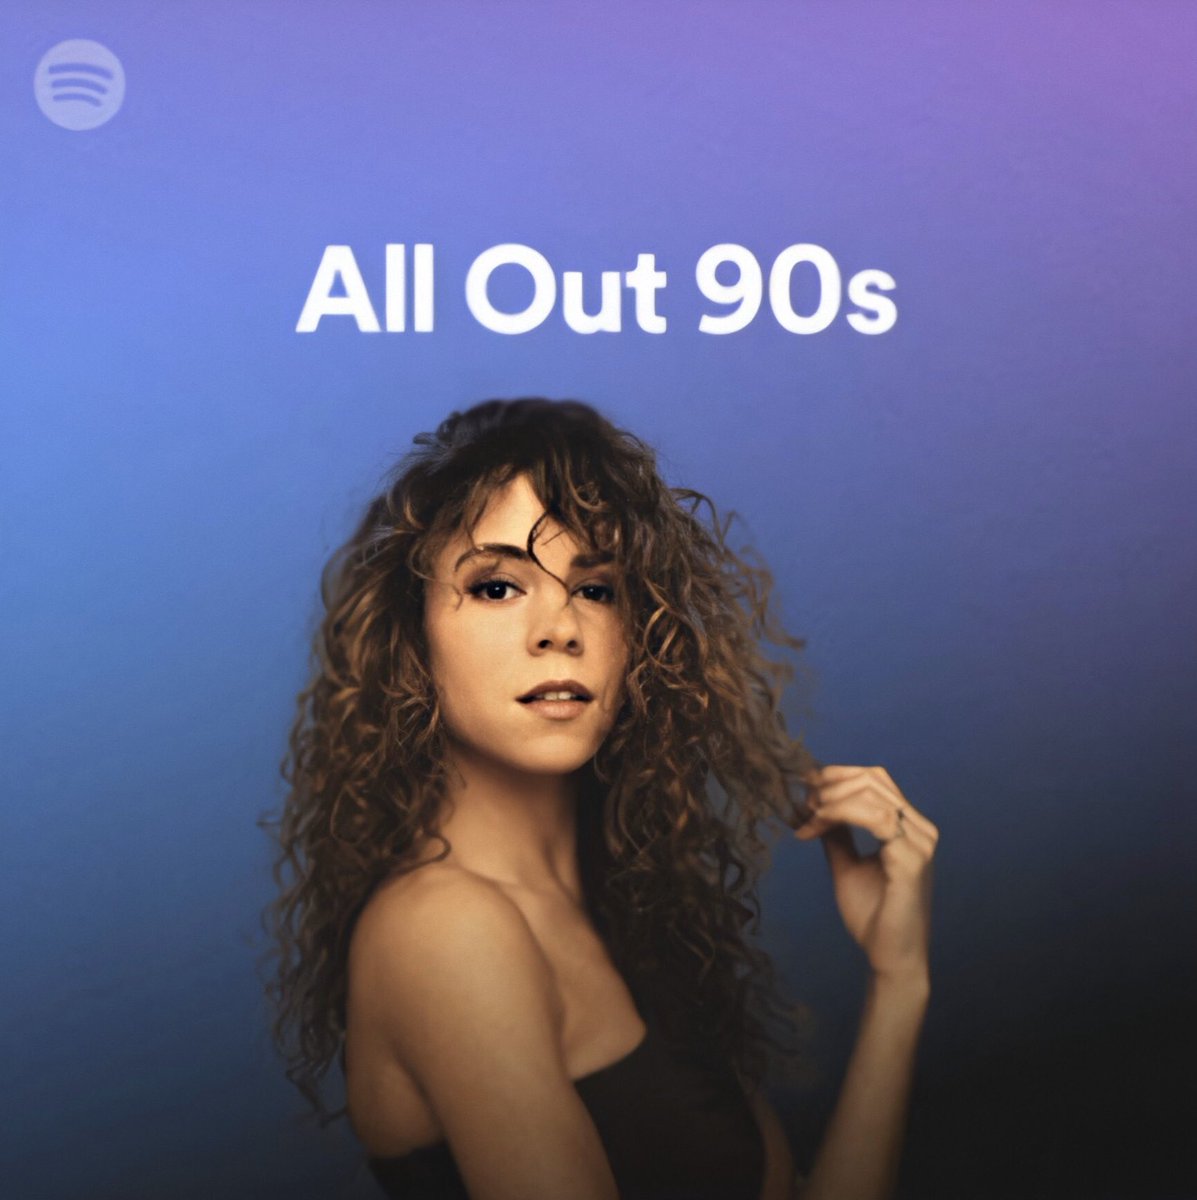 All Out 90s (2020) Part 2